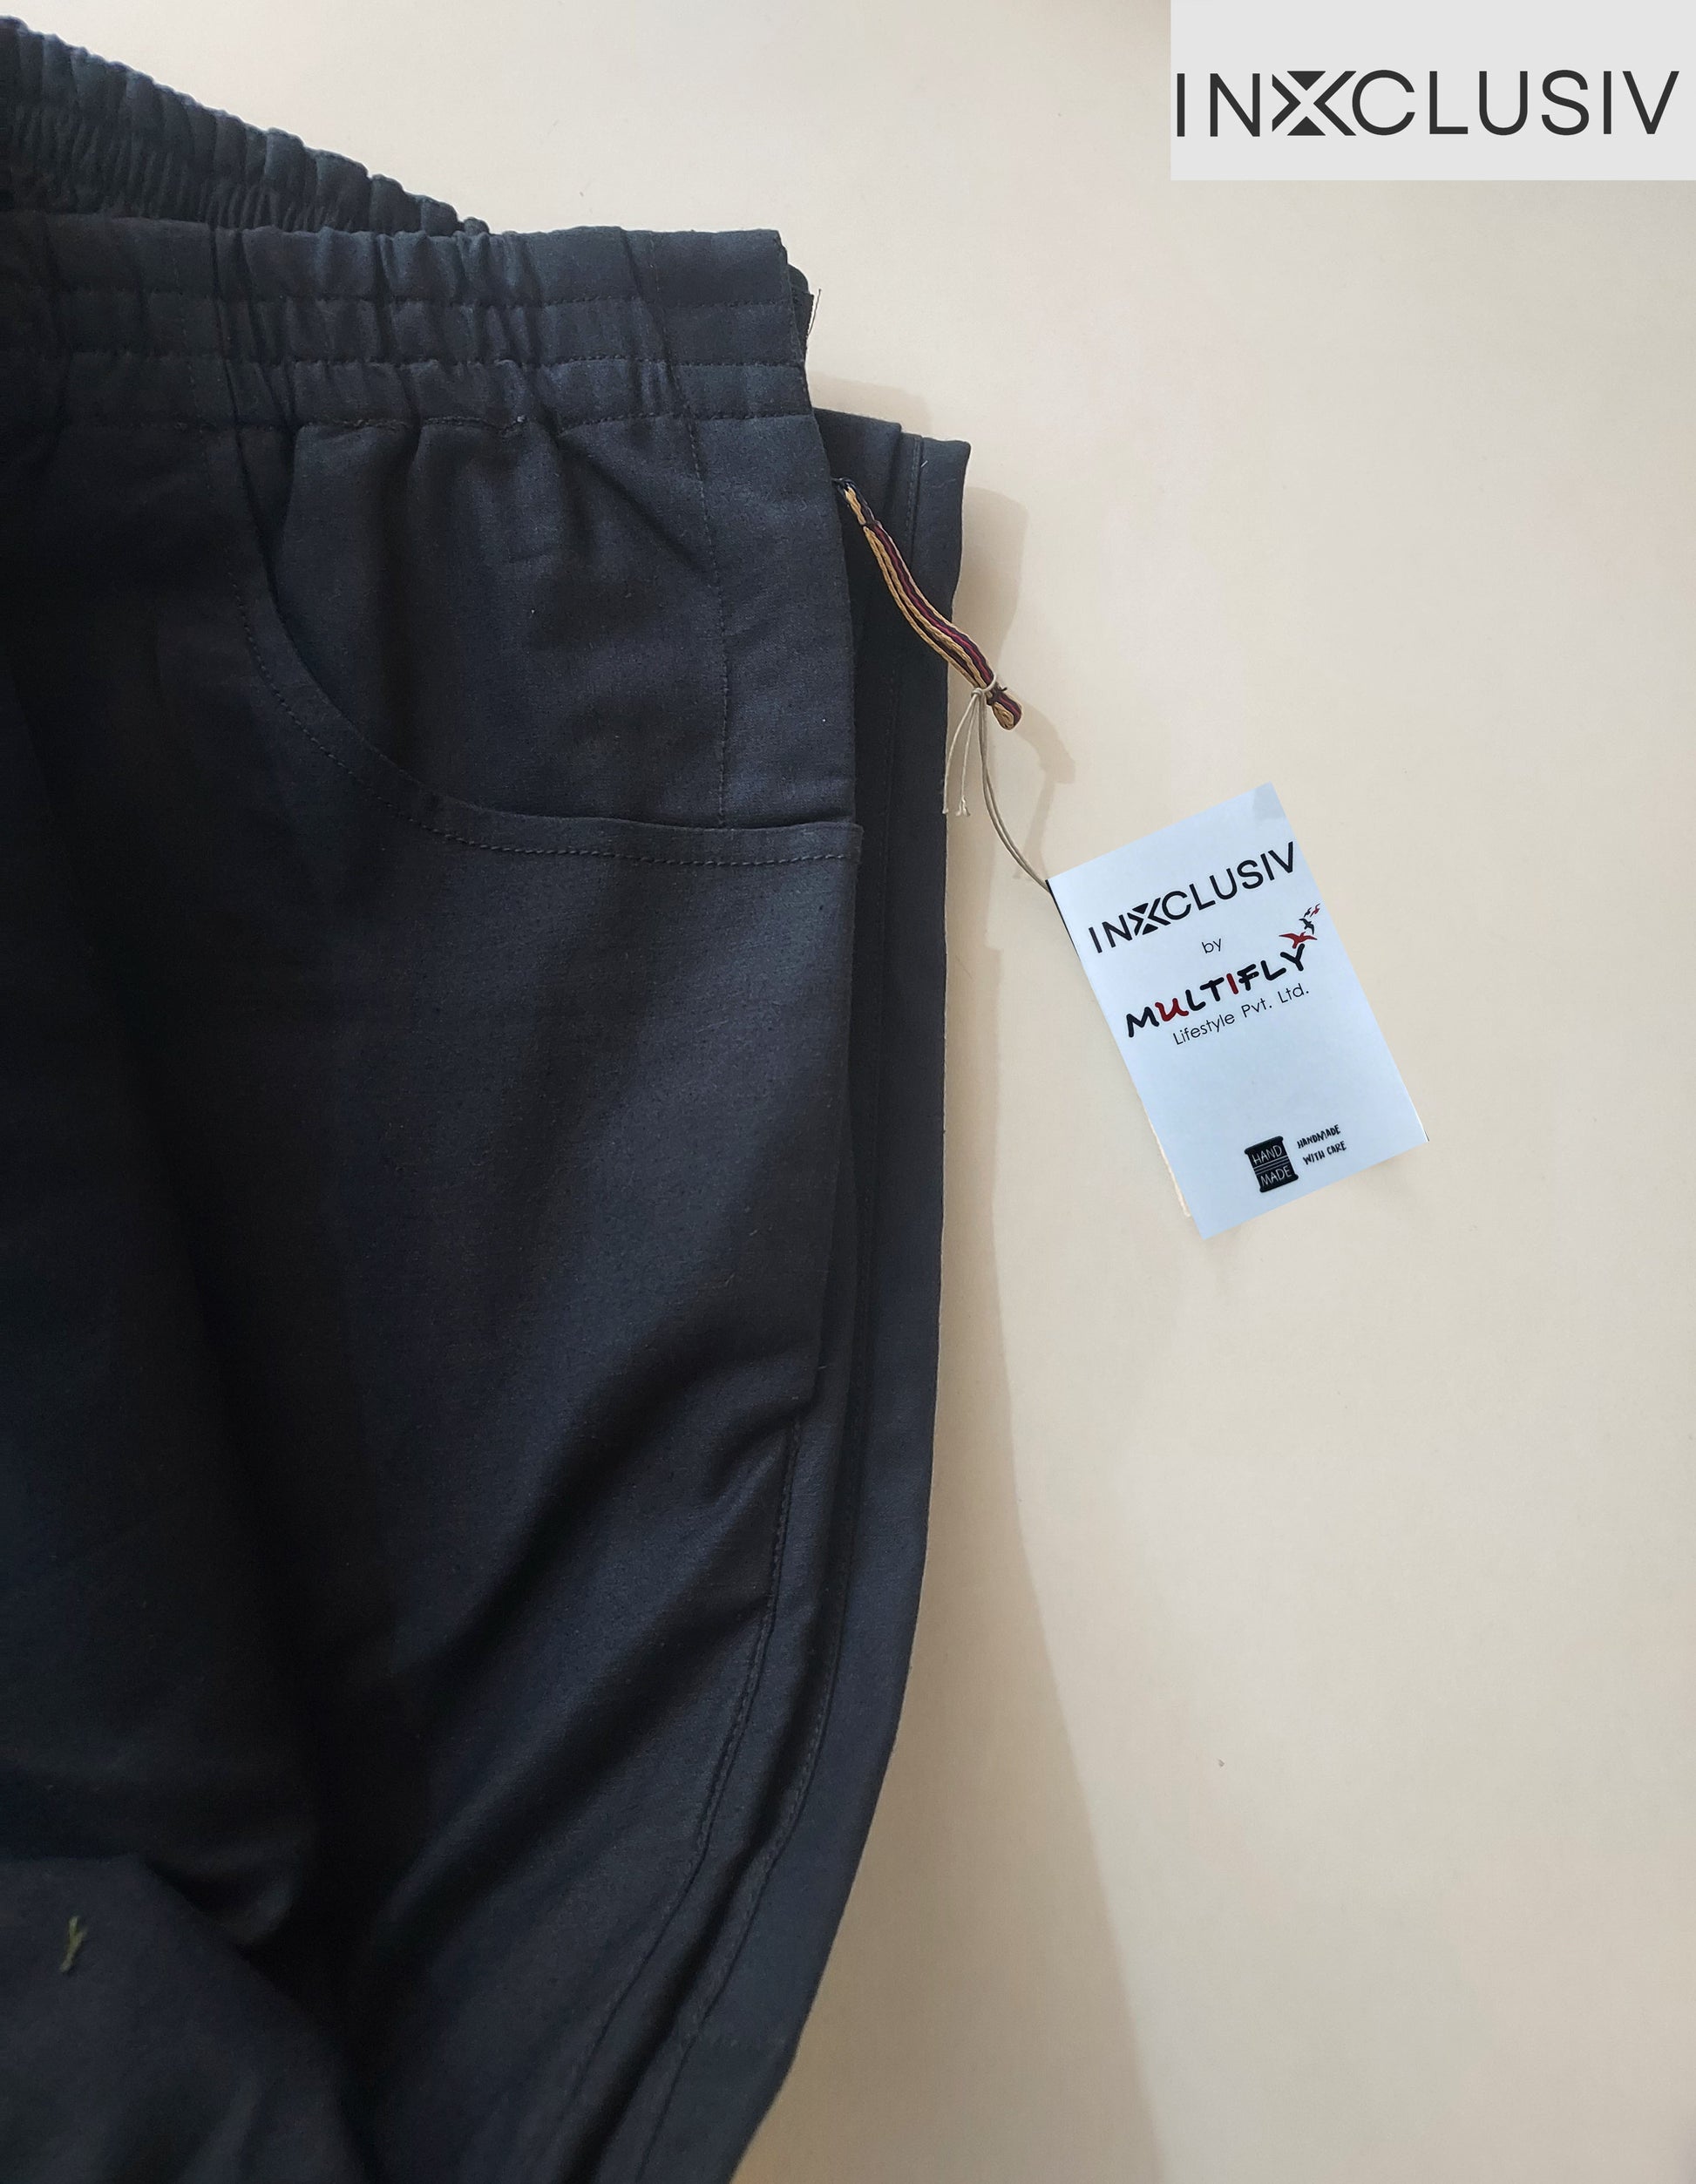 The trouser is half fold from the centre. here both the side seams are alligned with each other. scoop pocket, zipper puller tab and tag is visible. There is a brand logo on the right hand top corner of the picture.